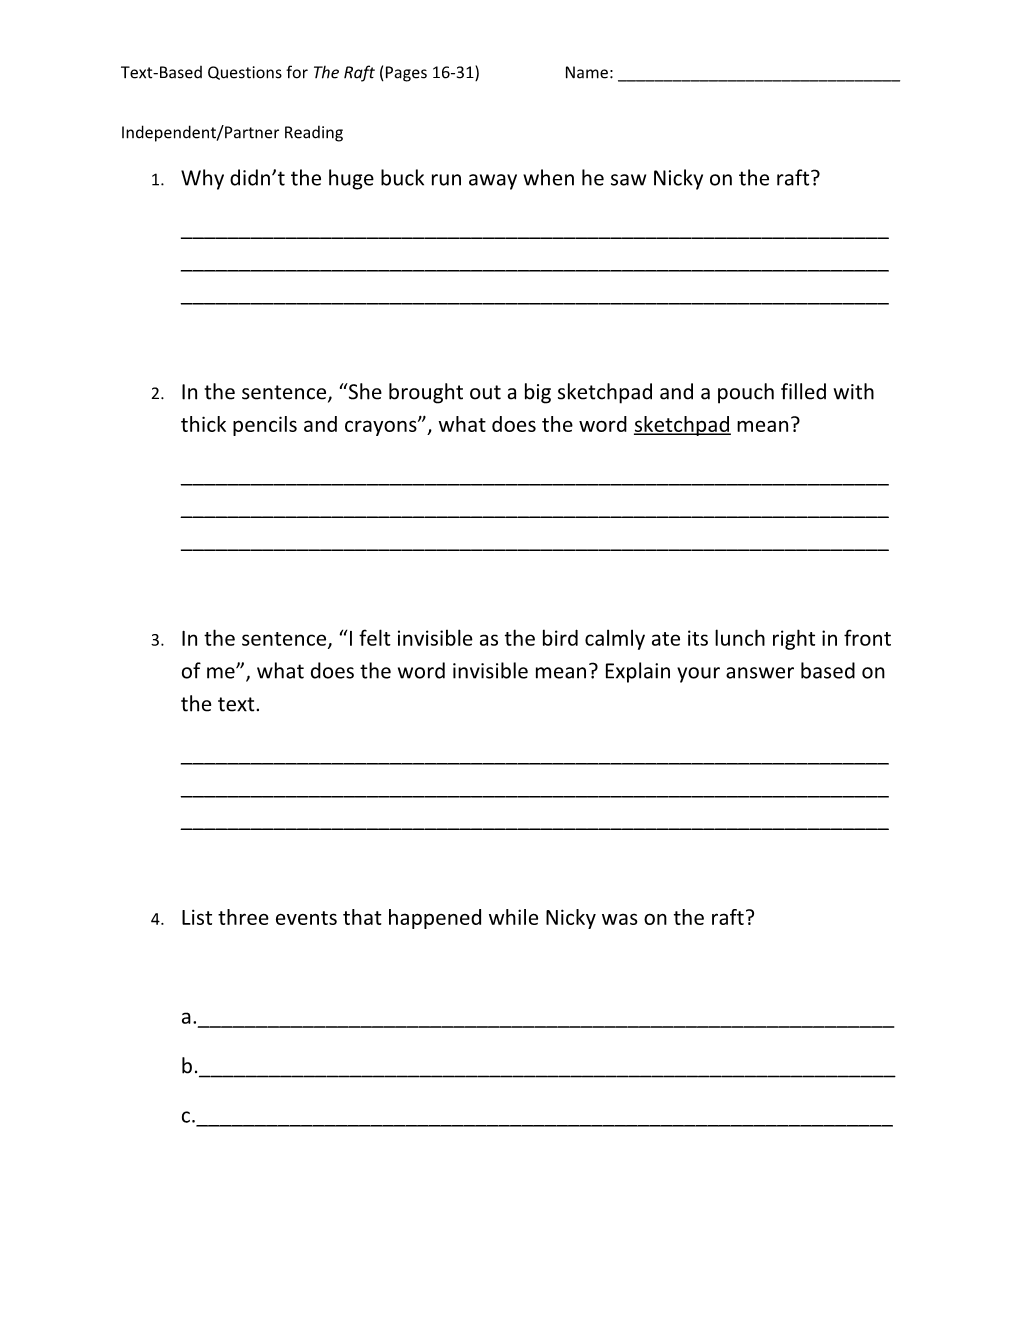 Text-Based Questions for the Raft (Pages 16-31)Name: ______